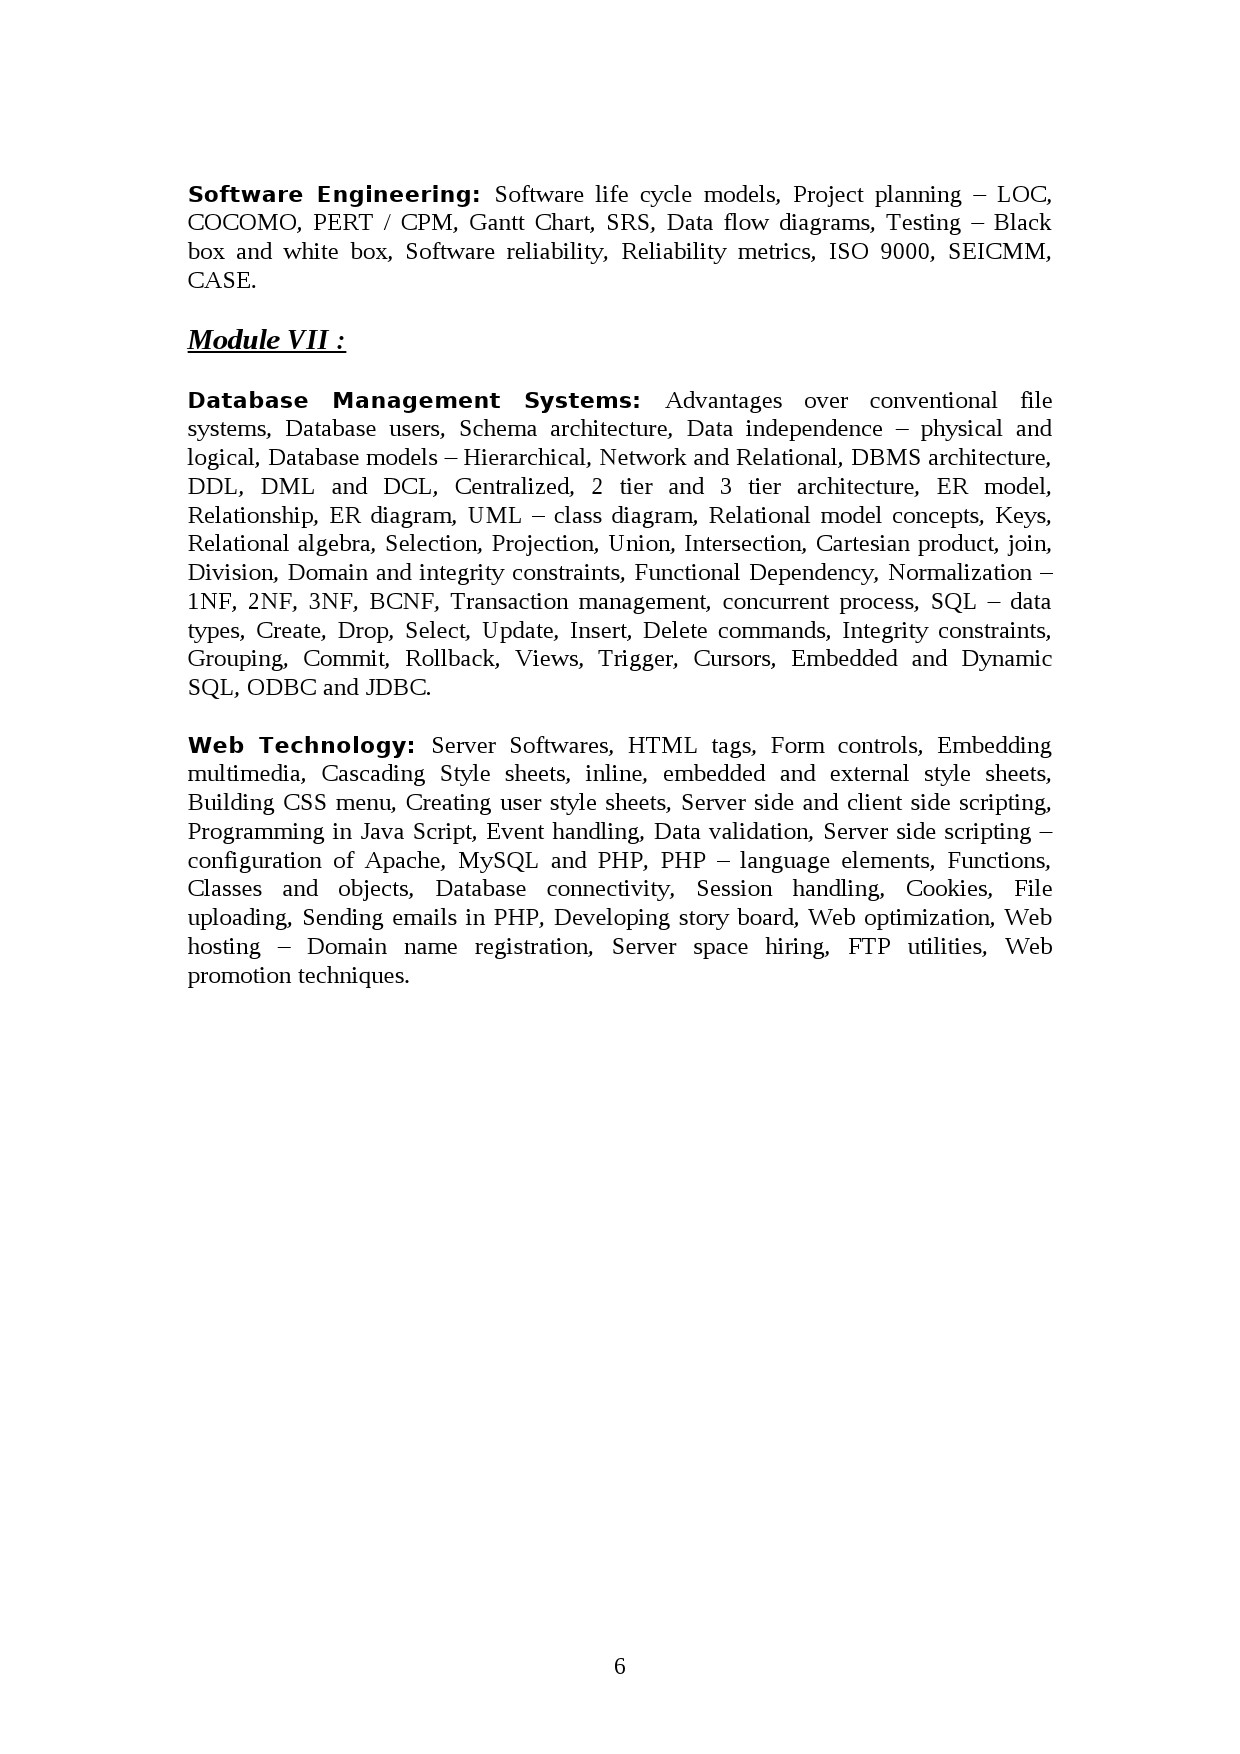 Computer Engineering Lecturer in Polytechnic Exam Syllabus - Notification Image 6